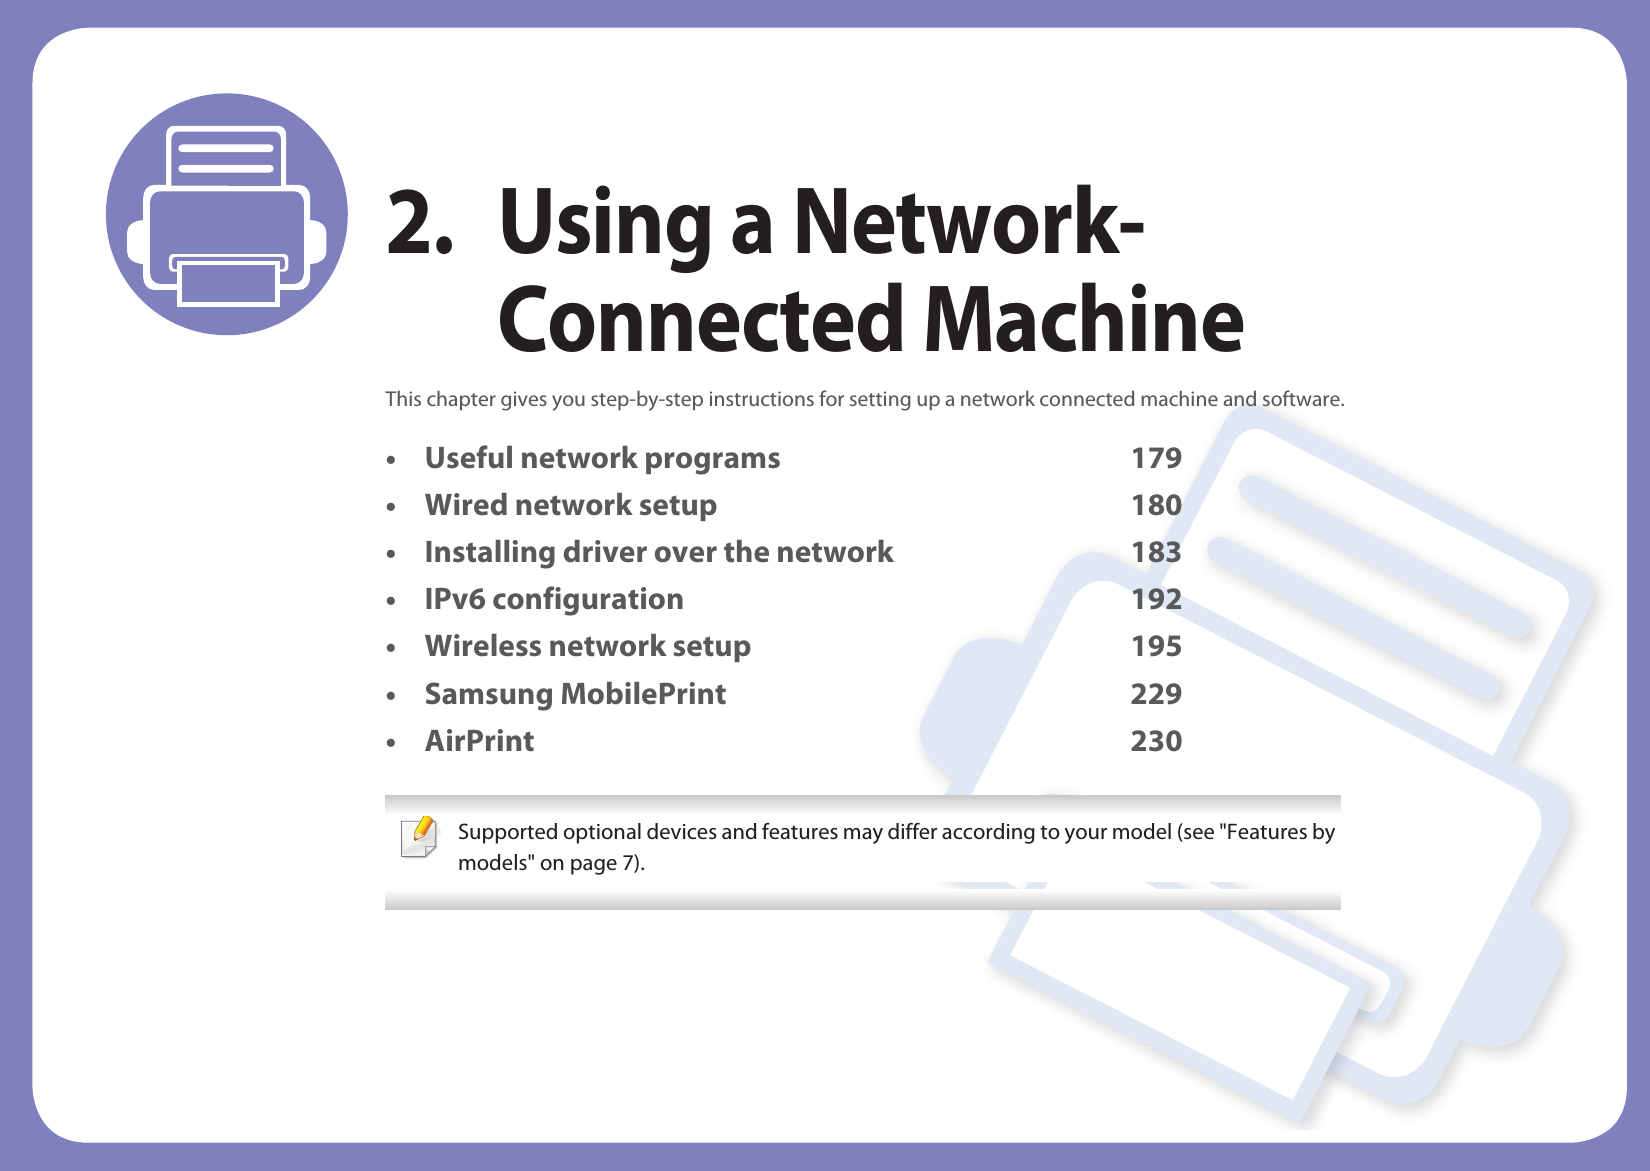 2. Using a Network-Connected MachineThis chapter gives you step-by-step instructions for setting up a network connected machine and software.• Useful network programs 179• Wired network setup 180• Installing driver over the network 183• IPv6 configuration 192• Wireless network setup 195• Samsung MobilePrint 229• AirPrint 230 Supported optional devices and features may differ according to your model (see &quot;Features by models&quot; on page 7). 